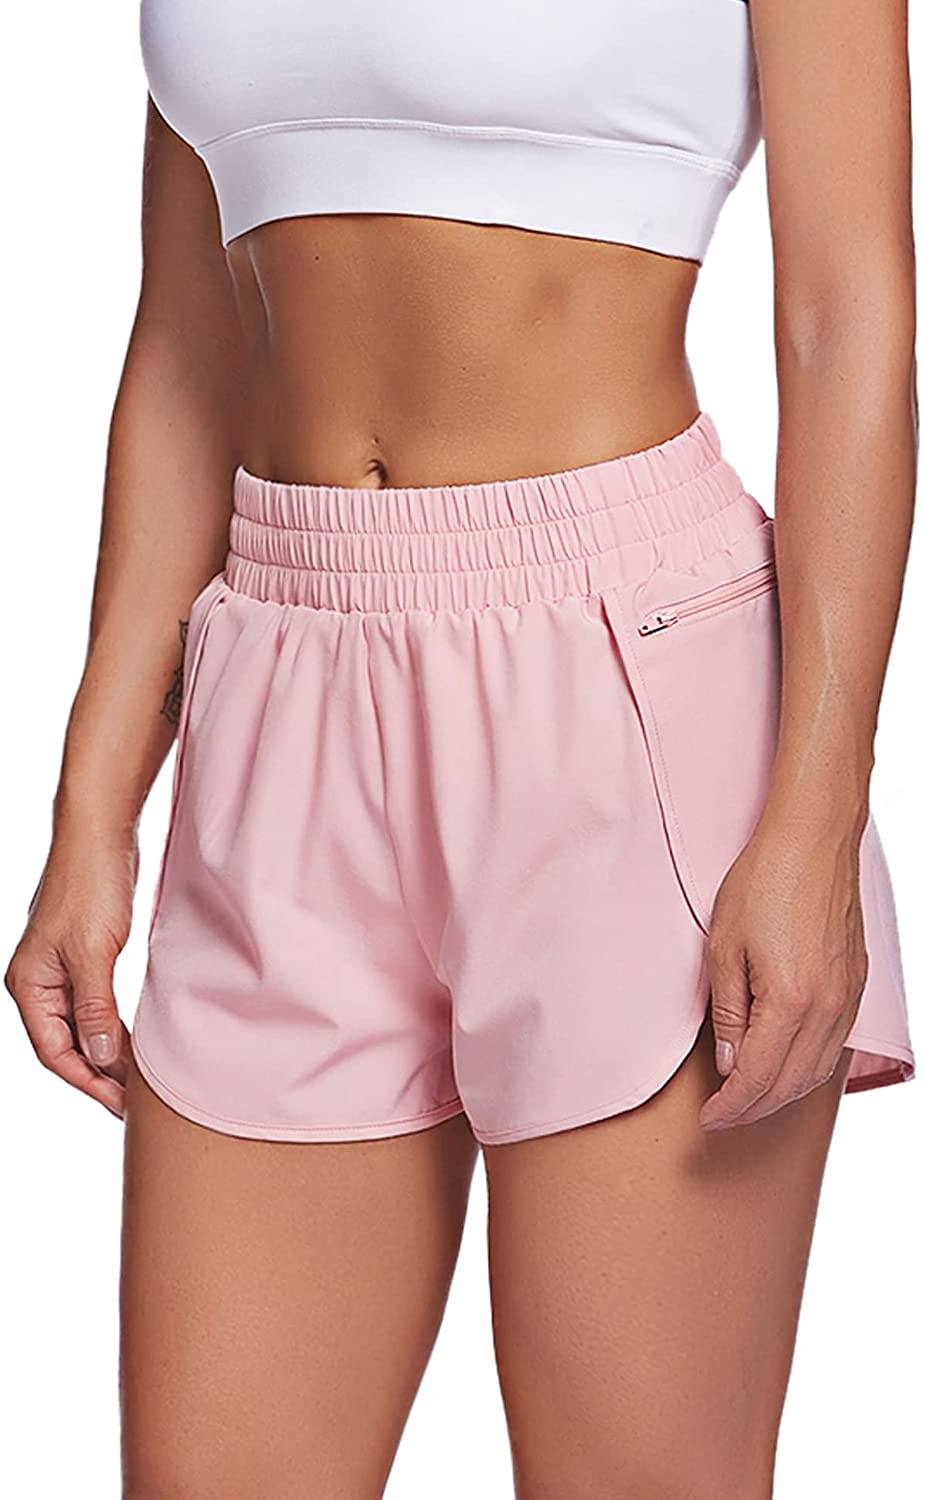  LaLaLa Womens Summer Running Workout Shorts with Liner